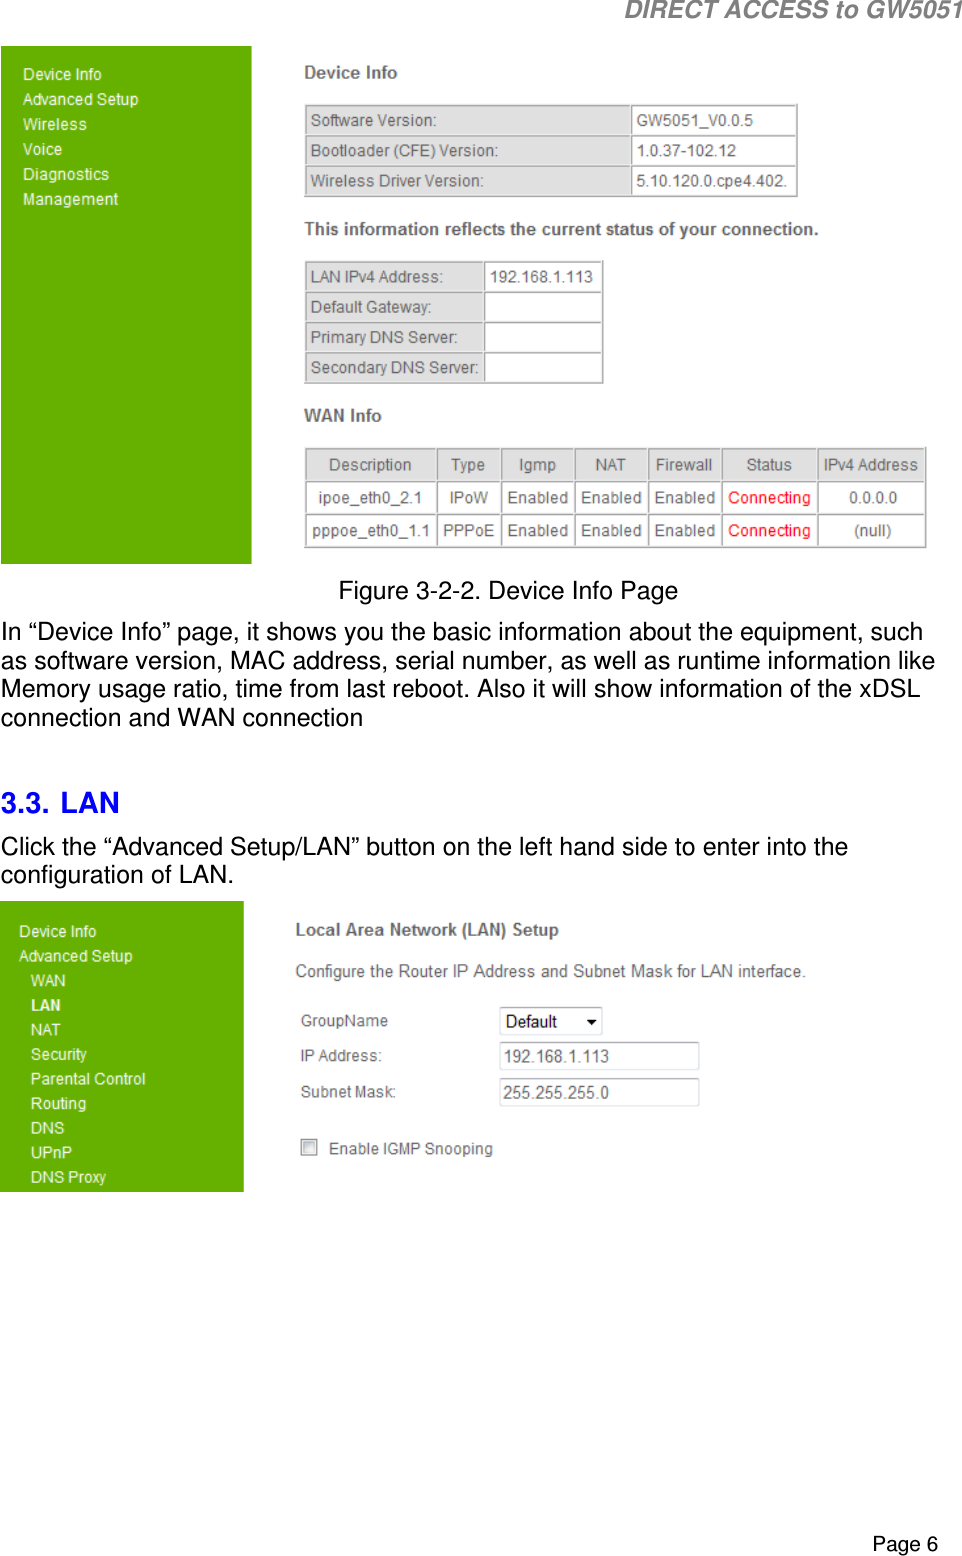                                                                                                                                                                                                                           DIRECT ACCESS to GW5051    Page 6  Figure 3-2-2. Device Info Page In “Device Info” page, it shows you the basic information about the equipment, such as software version, MAC address, serial number, as well as runtime information like Memory usage ratio, time from last reboot. Also it will show information of the xDSL connection and WAN connection   3.3. LAN Click the “Advanced Setup/LAN” button on the left hand side to enter into the configuration of LAN.   